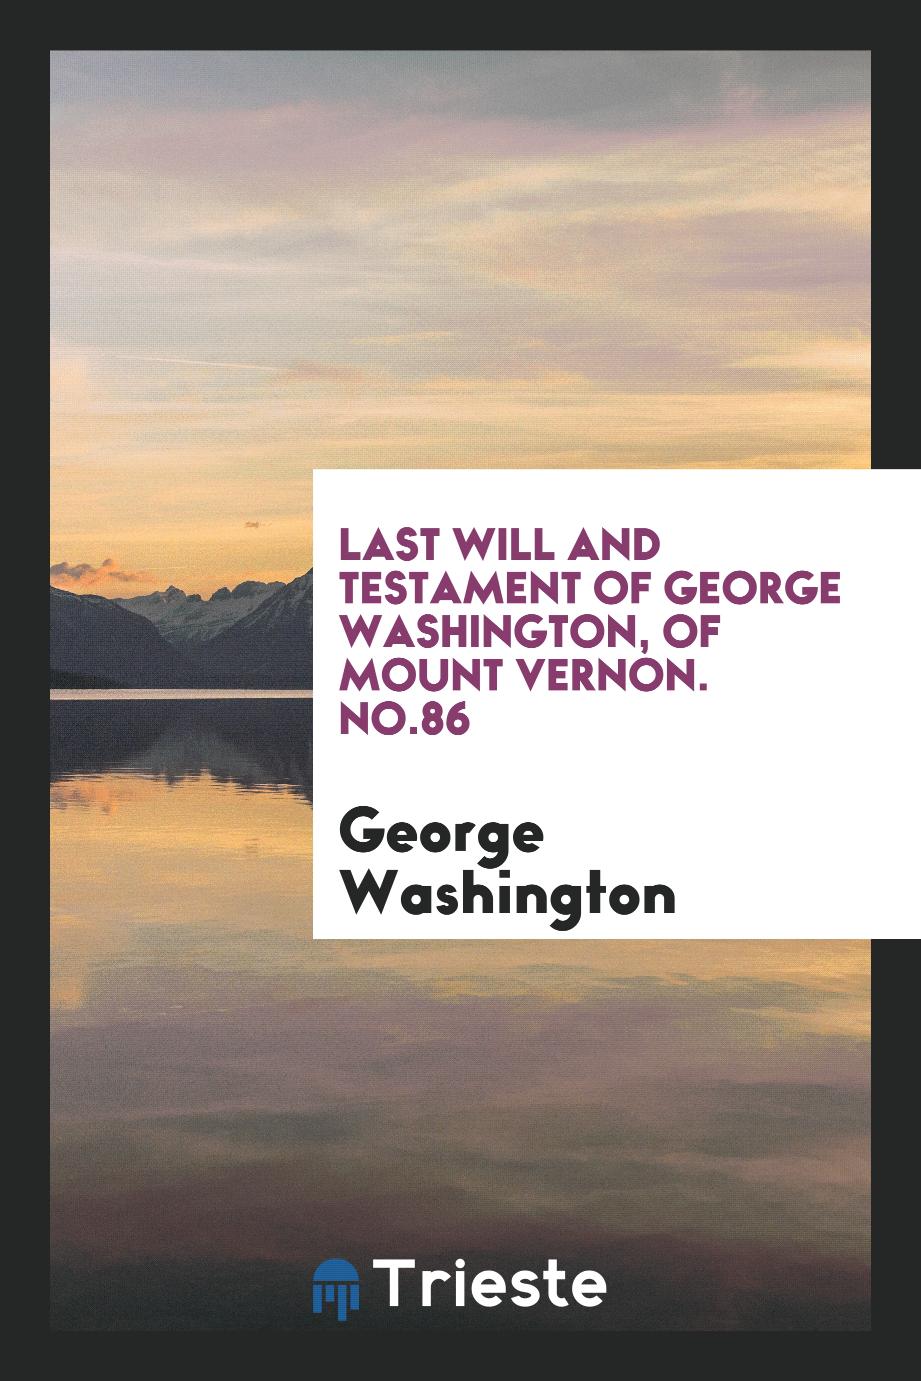 Last Will and Testament of George Washington, of Mount Vernon. No.86